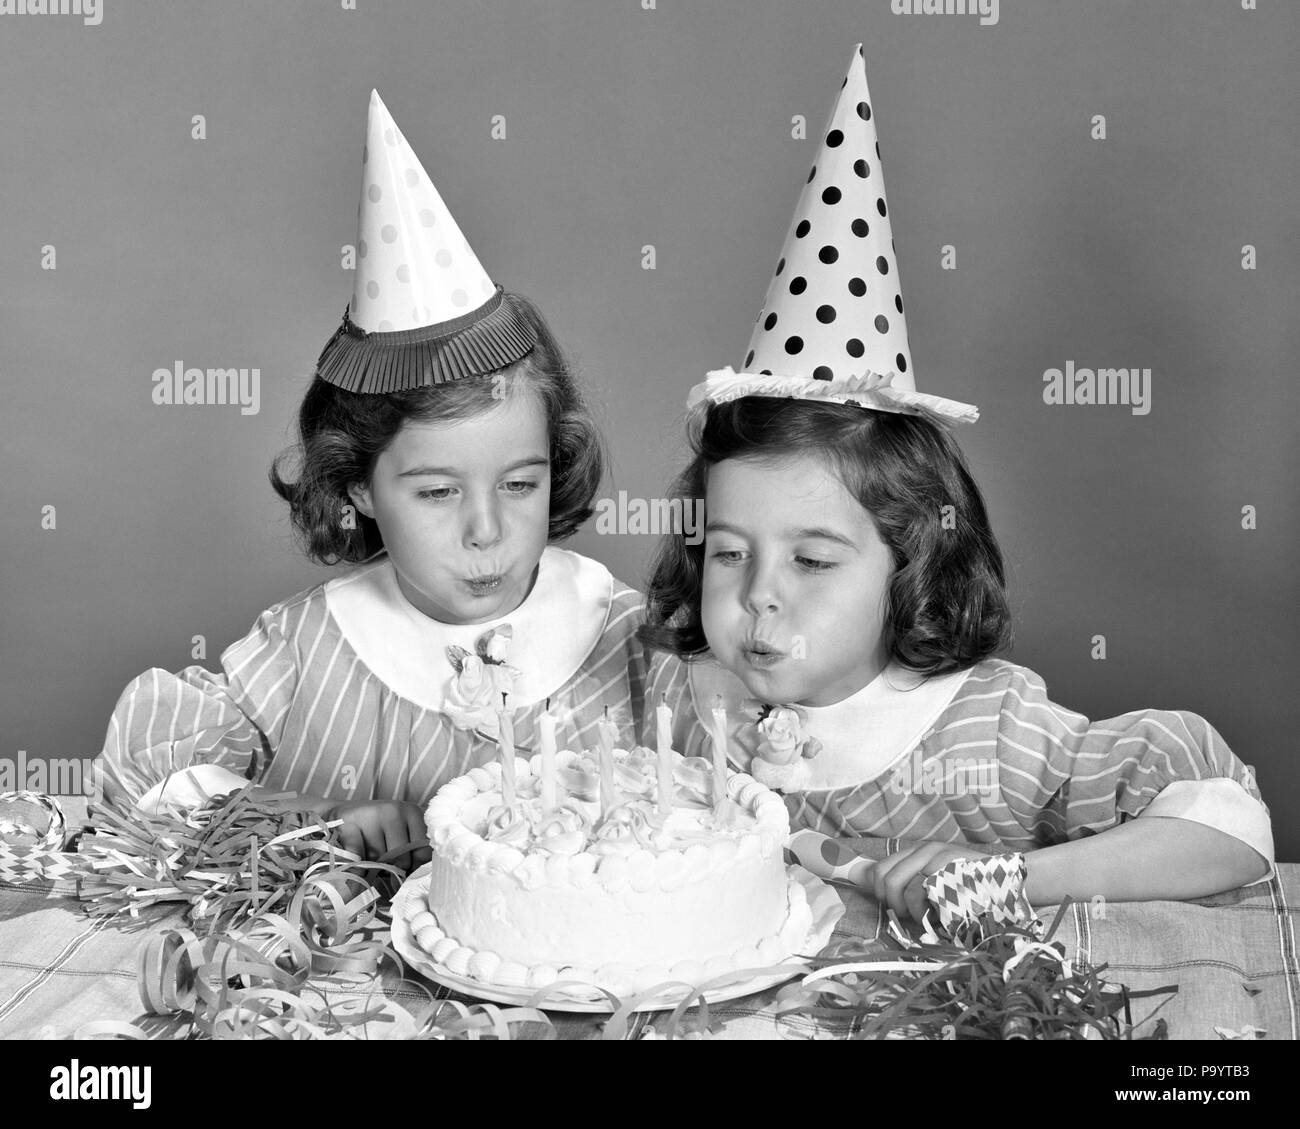 1960s TWIN GIRLS WEARING PARTY HATS BLOWING OUT CANDLES ON BIRTHDAY CAKE - j12268 HAR001 HARS HALF-LENGTH INSPIRATION MATCH CARING SIBLINGS SPIRITUALITY SISTERS B&W MATCHING SAME HAPPINESS HEAD AND SHOULDERS EXCITEMENT RECREATION SIBLING STYLISH LOOK-ALIKE DUPLICATE GROWTH JUVENILES LOOK ALIKE TOGETHERNESS BLACK AND WHITE CAUCASIAN ETHNICITY CLONE HAR001 OLD FASHIONED Stock Photo